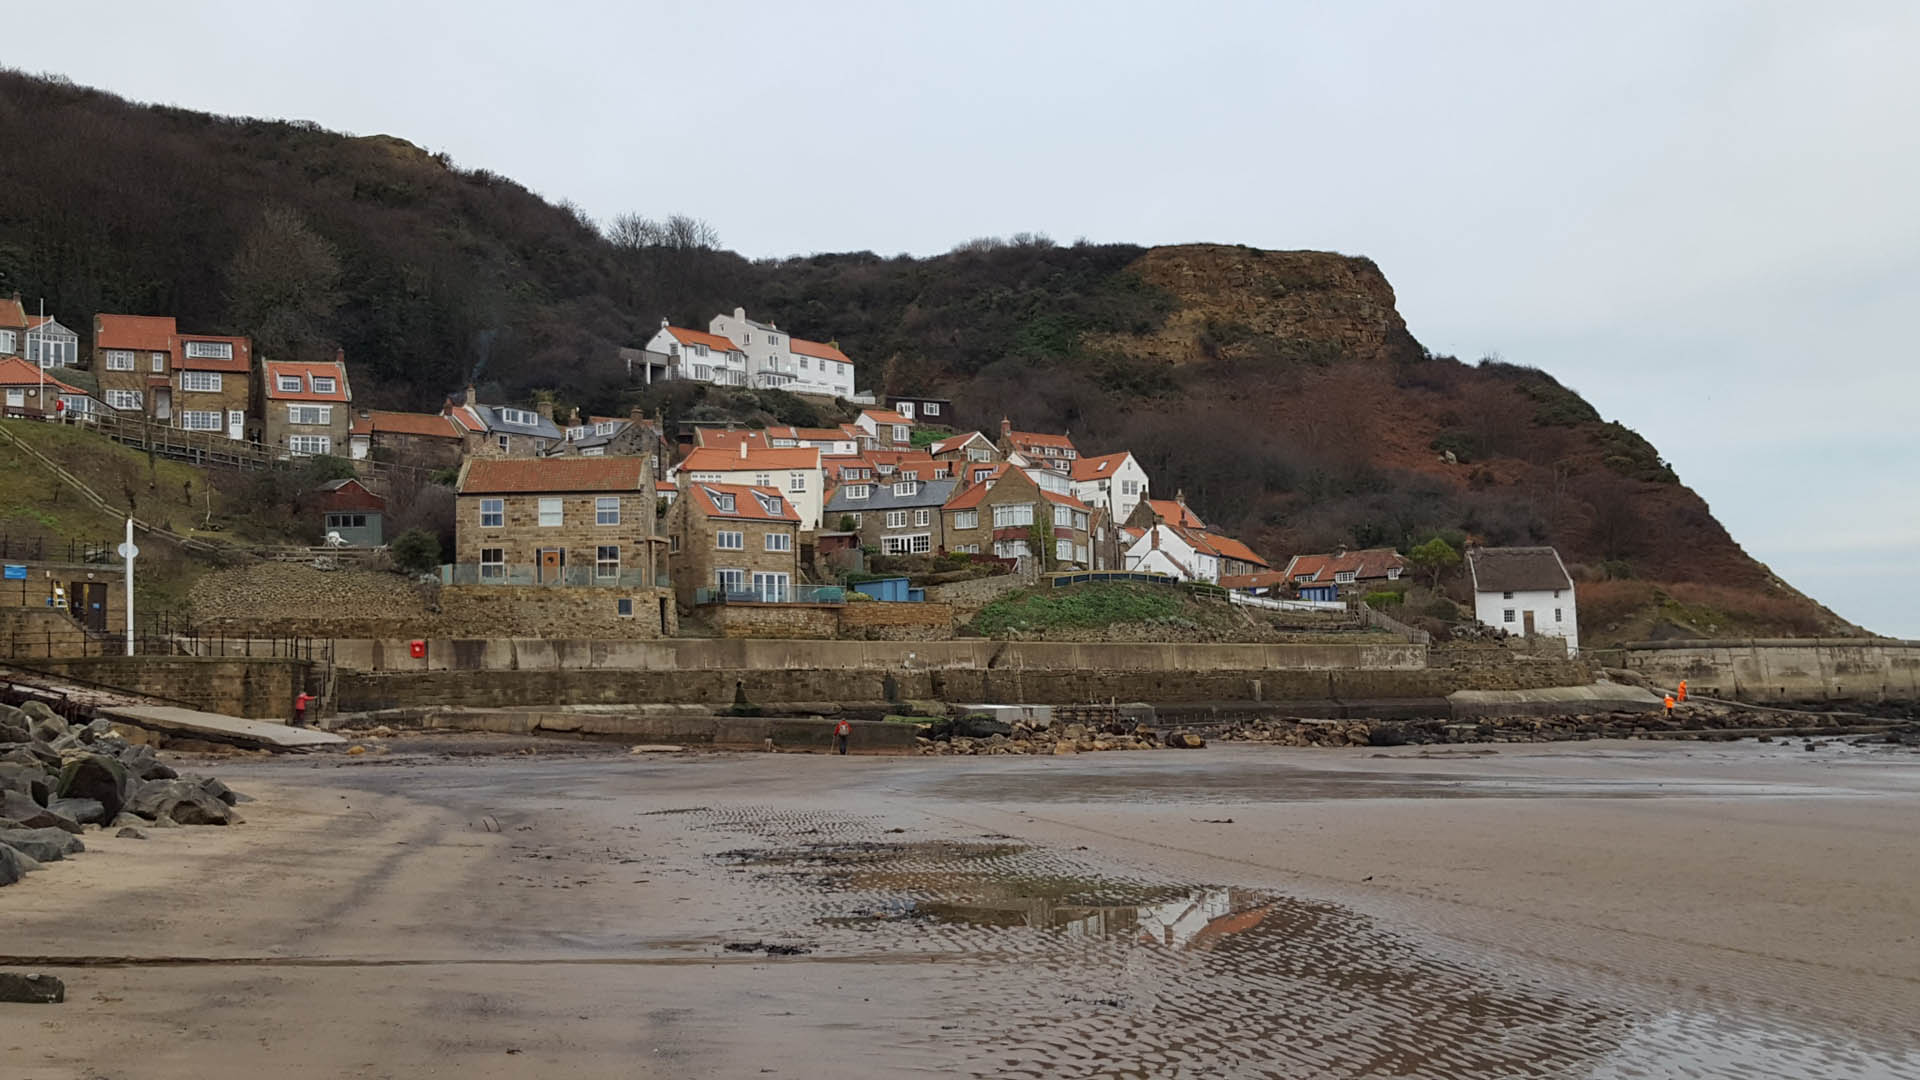 Runswick Bay Environmental Impact Assessment and ecological innovation